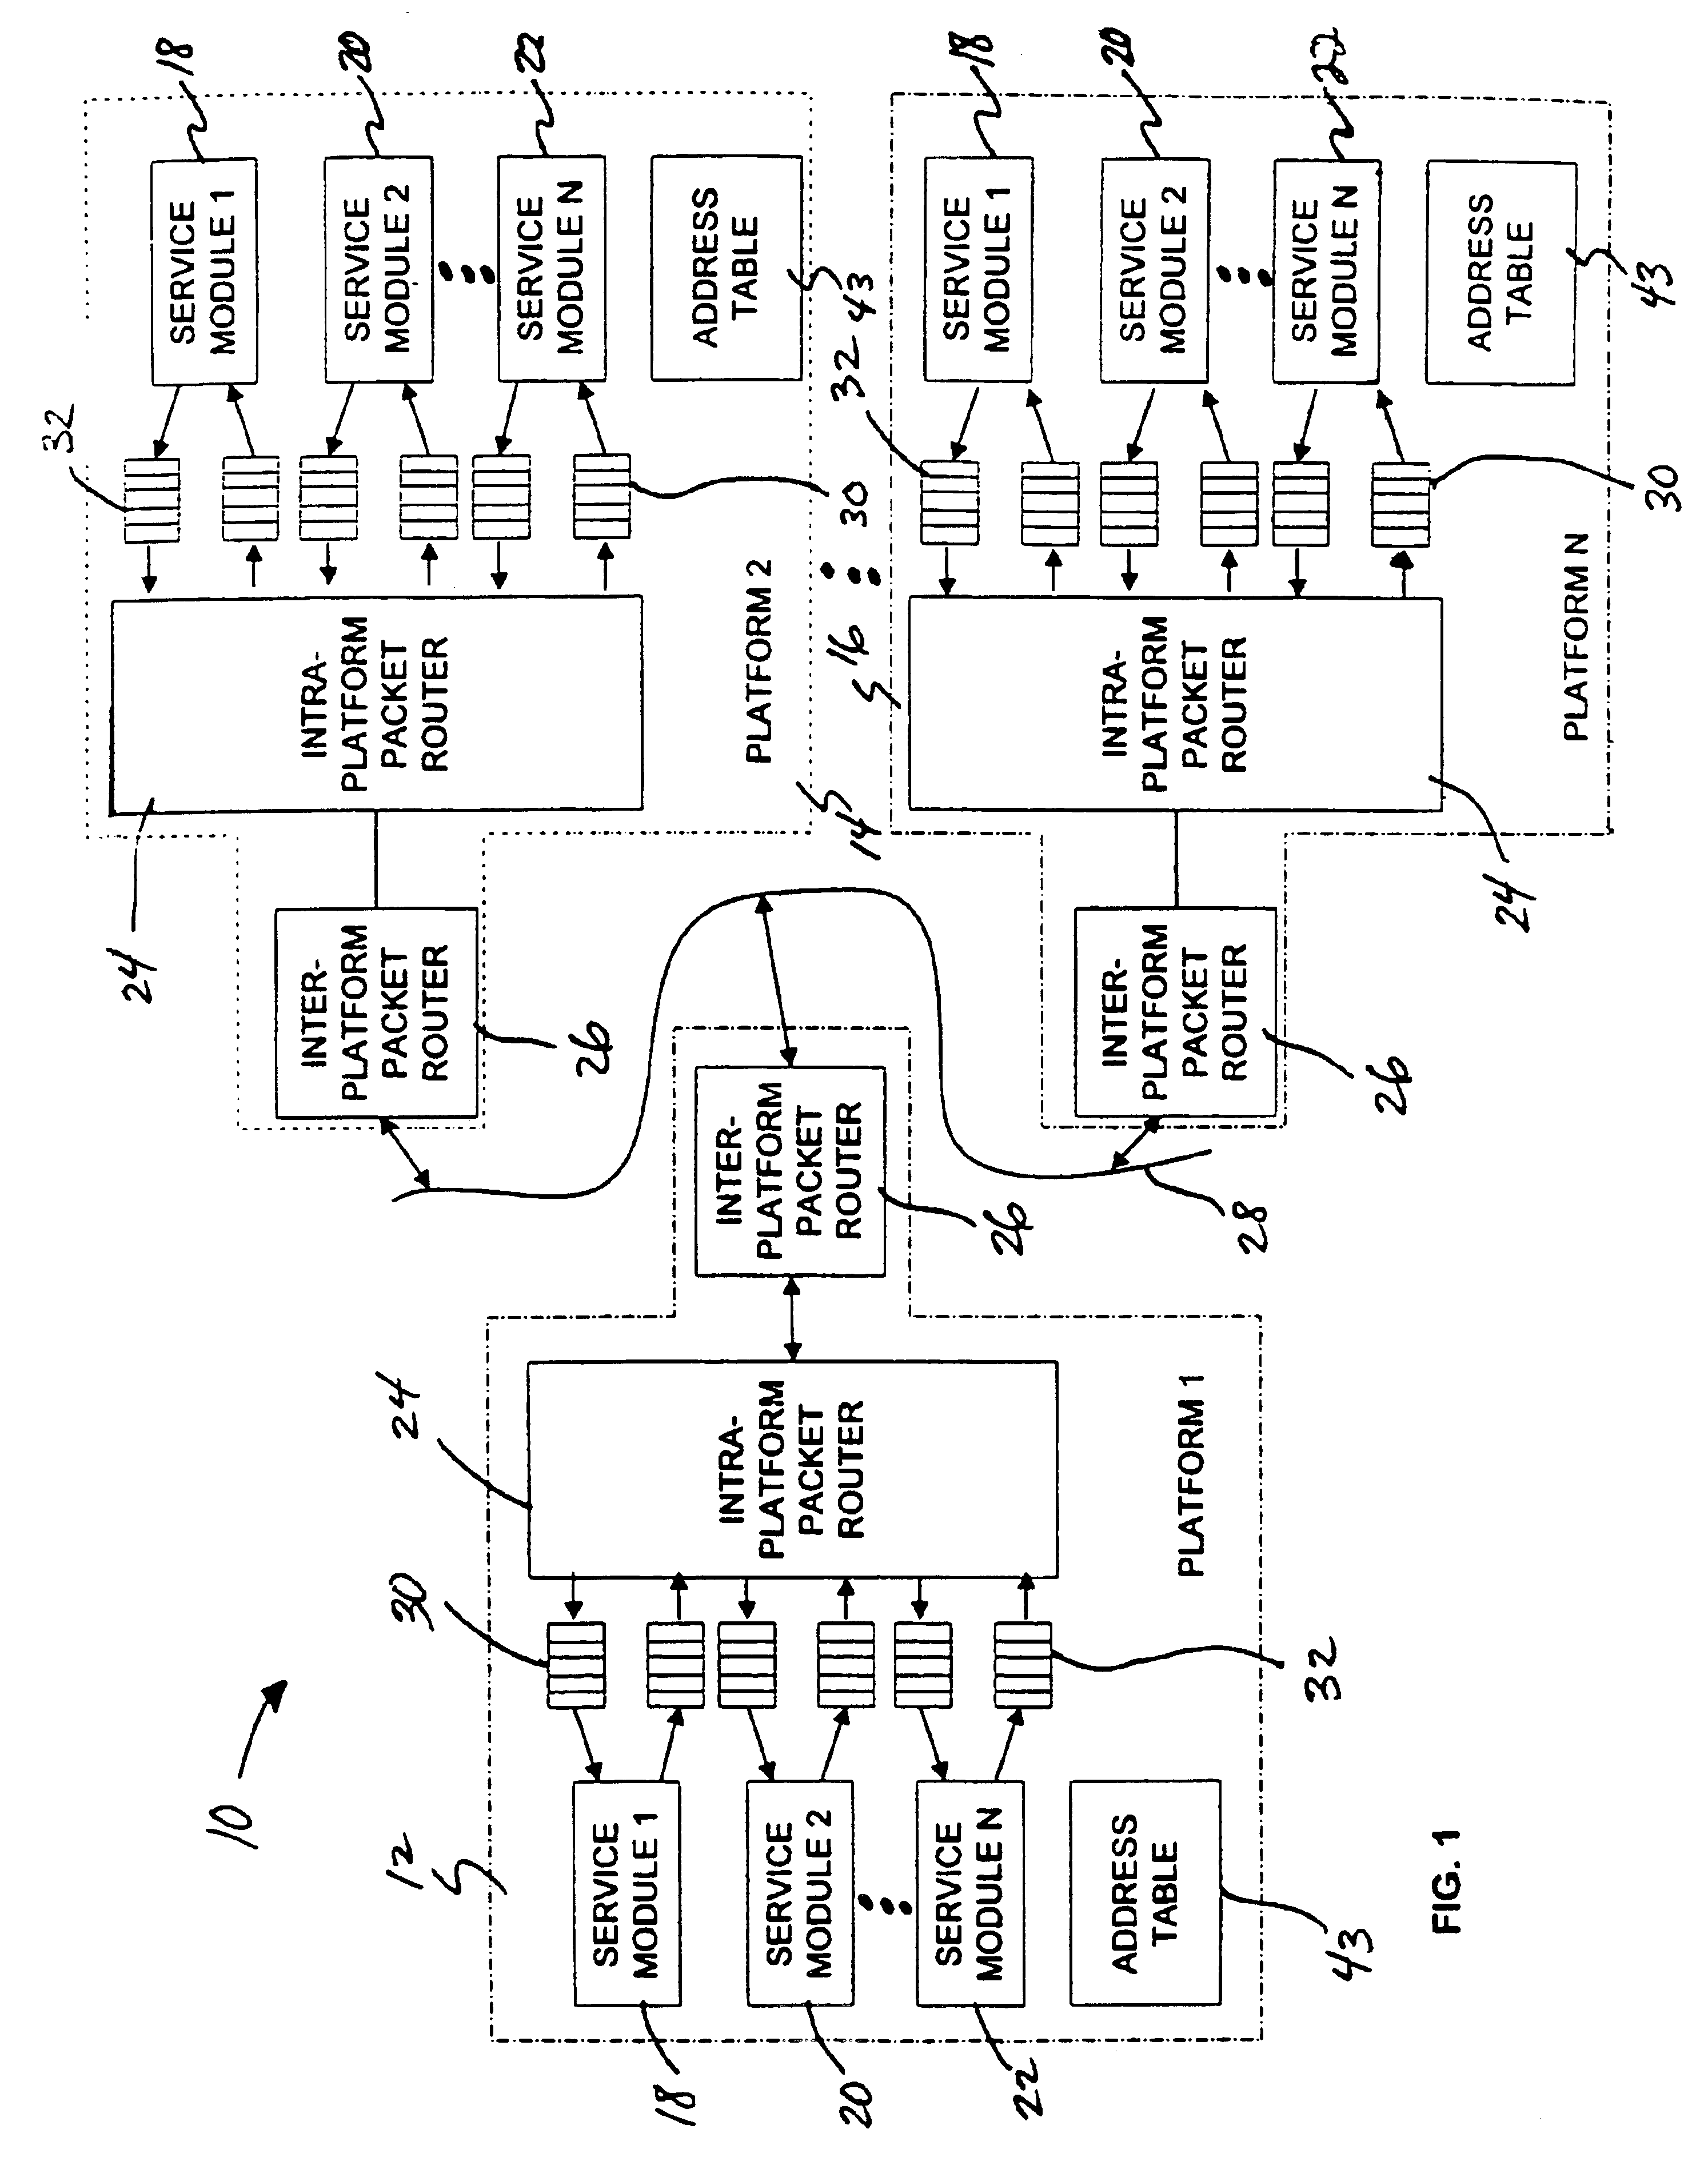 Computer telephony system using multiple hardware platforms to provide telephony services